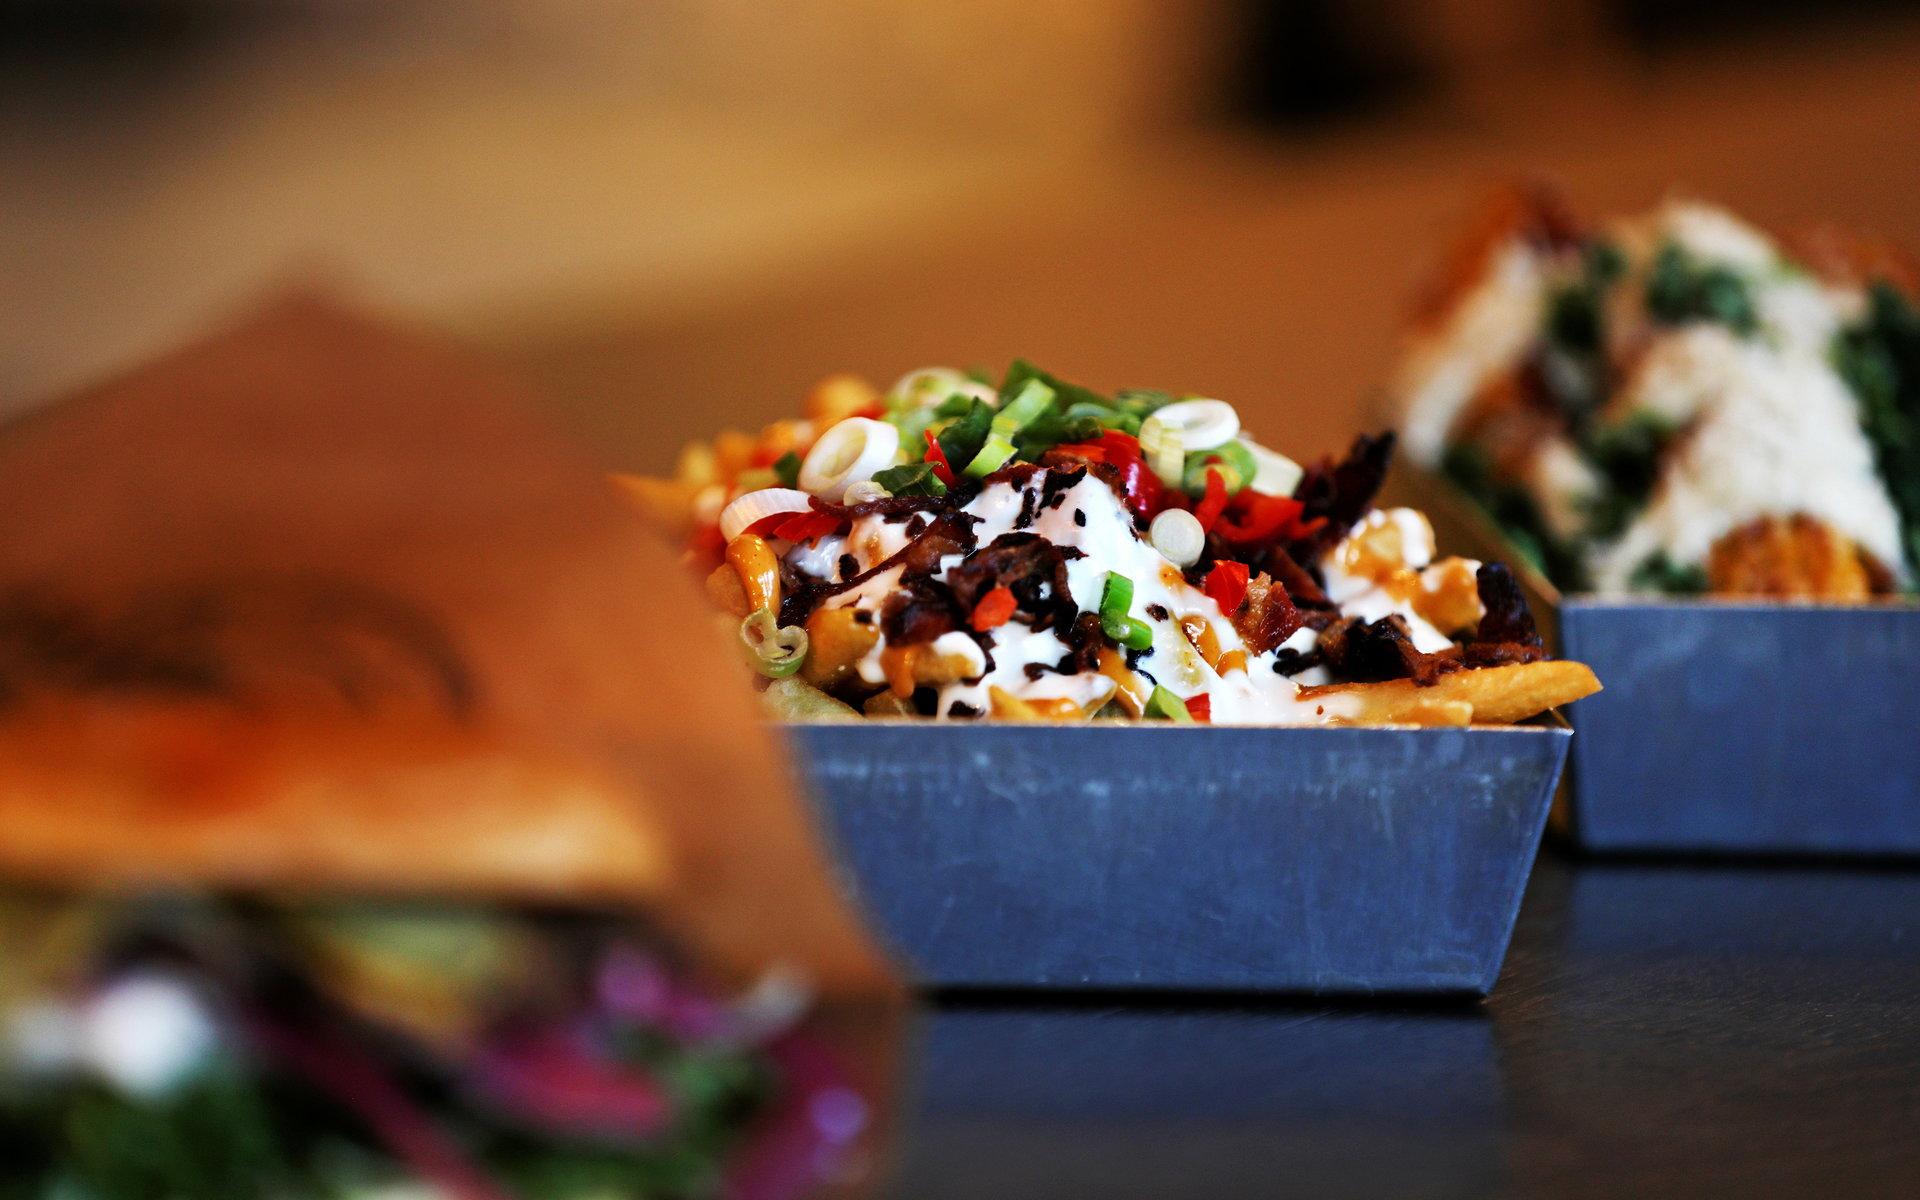 Dirty fries med chili.